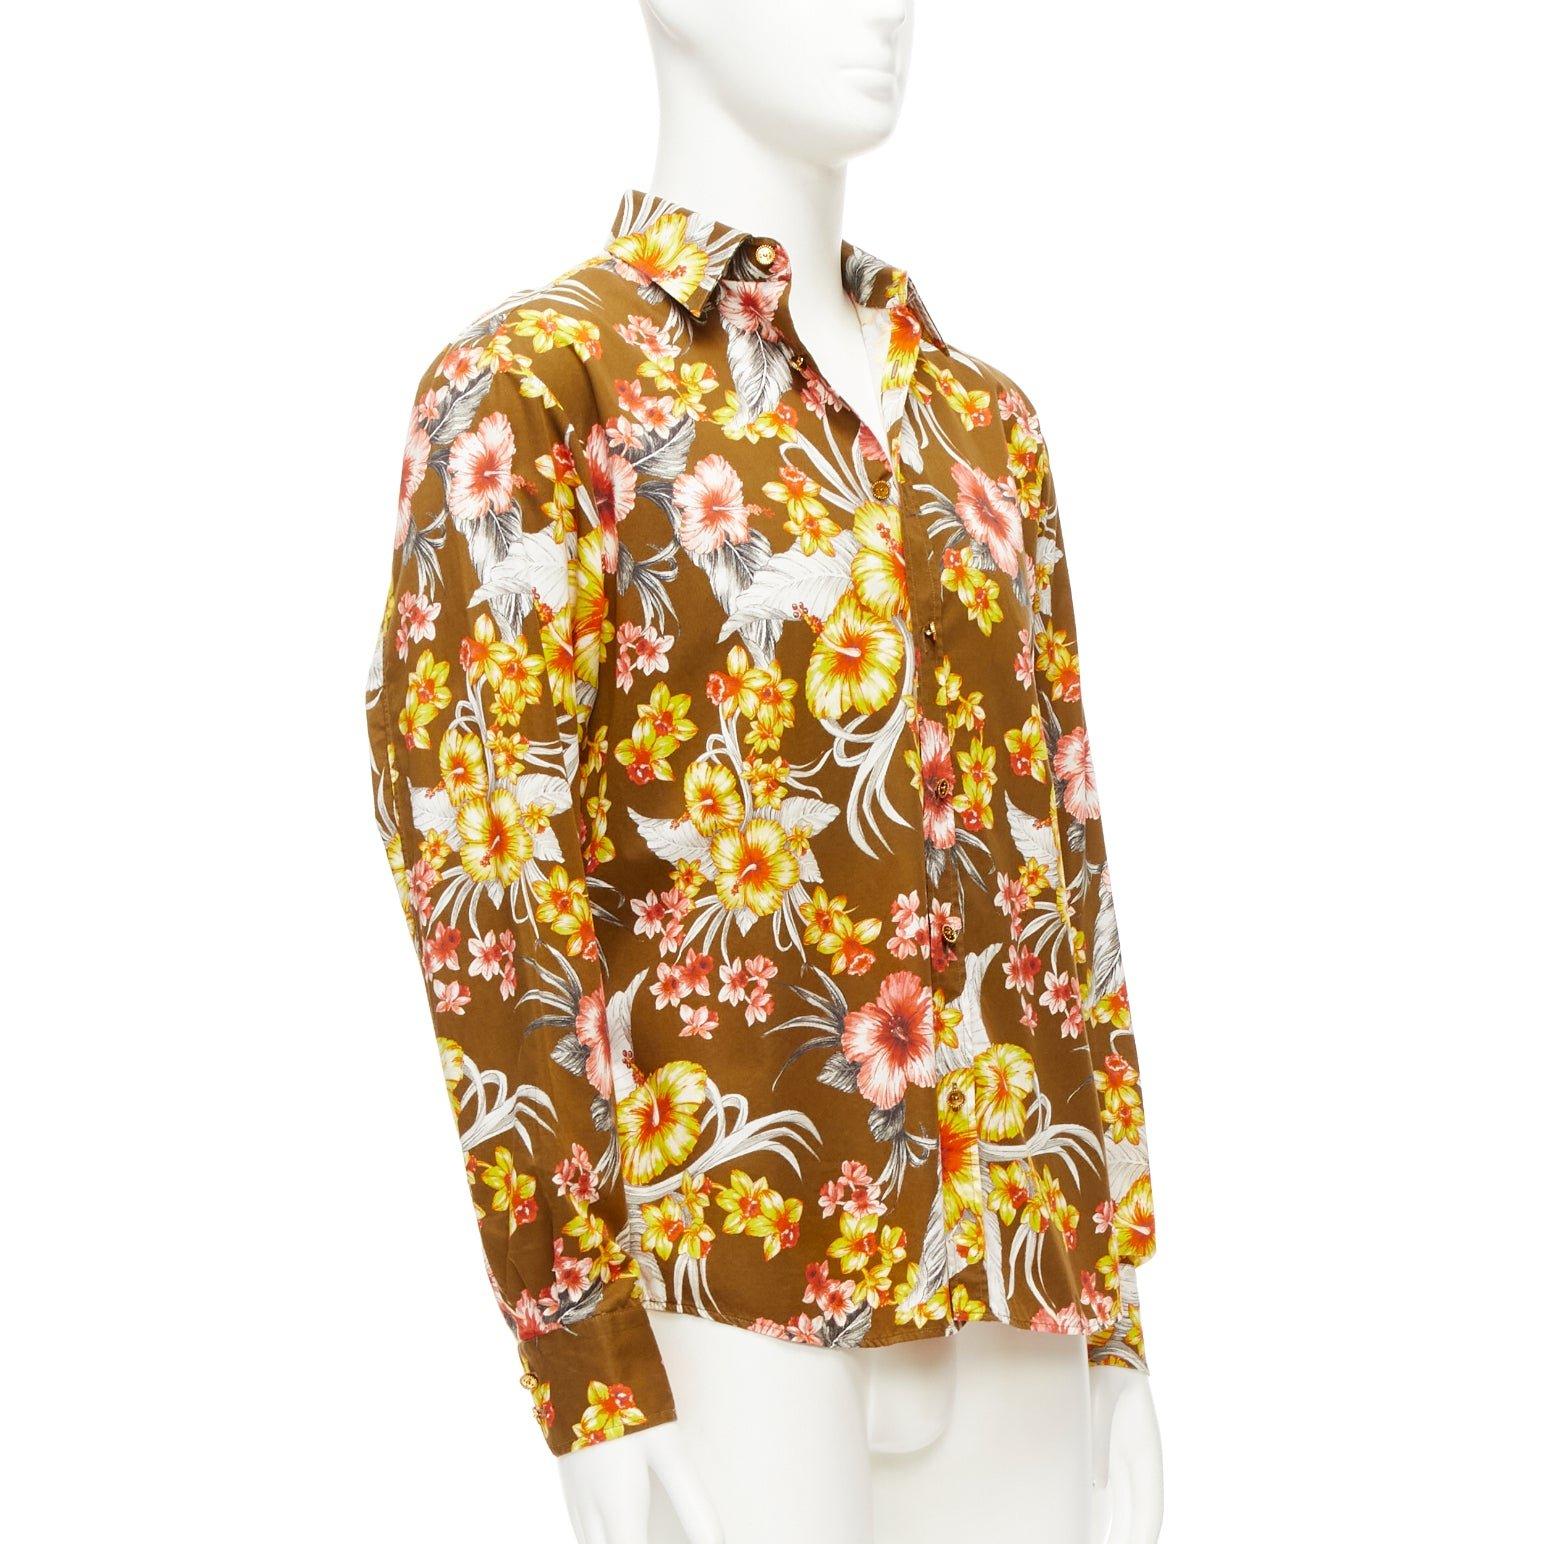 FAUSTO PUGLISI yellow khaki tropical floral cotton gold button shirt EU48 M
Reference: CNLE/A00293
Brand: Fausto Puglisi
Material: Cotton
Color: Yellow, Khaki
Pattern: Floral
Closure: Button
Extra Details: Gold buttons. Inverted pleat back.
Made in: